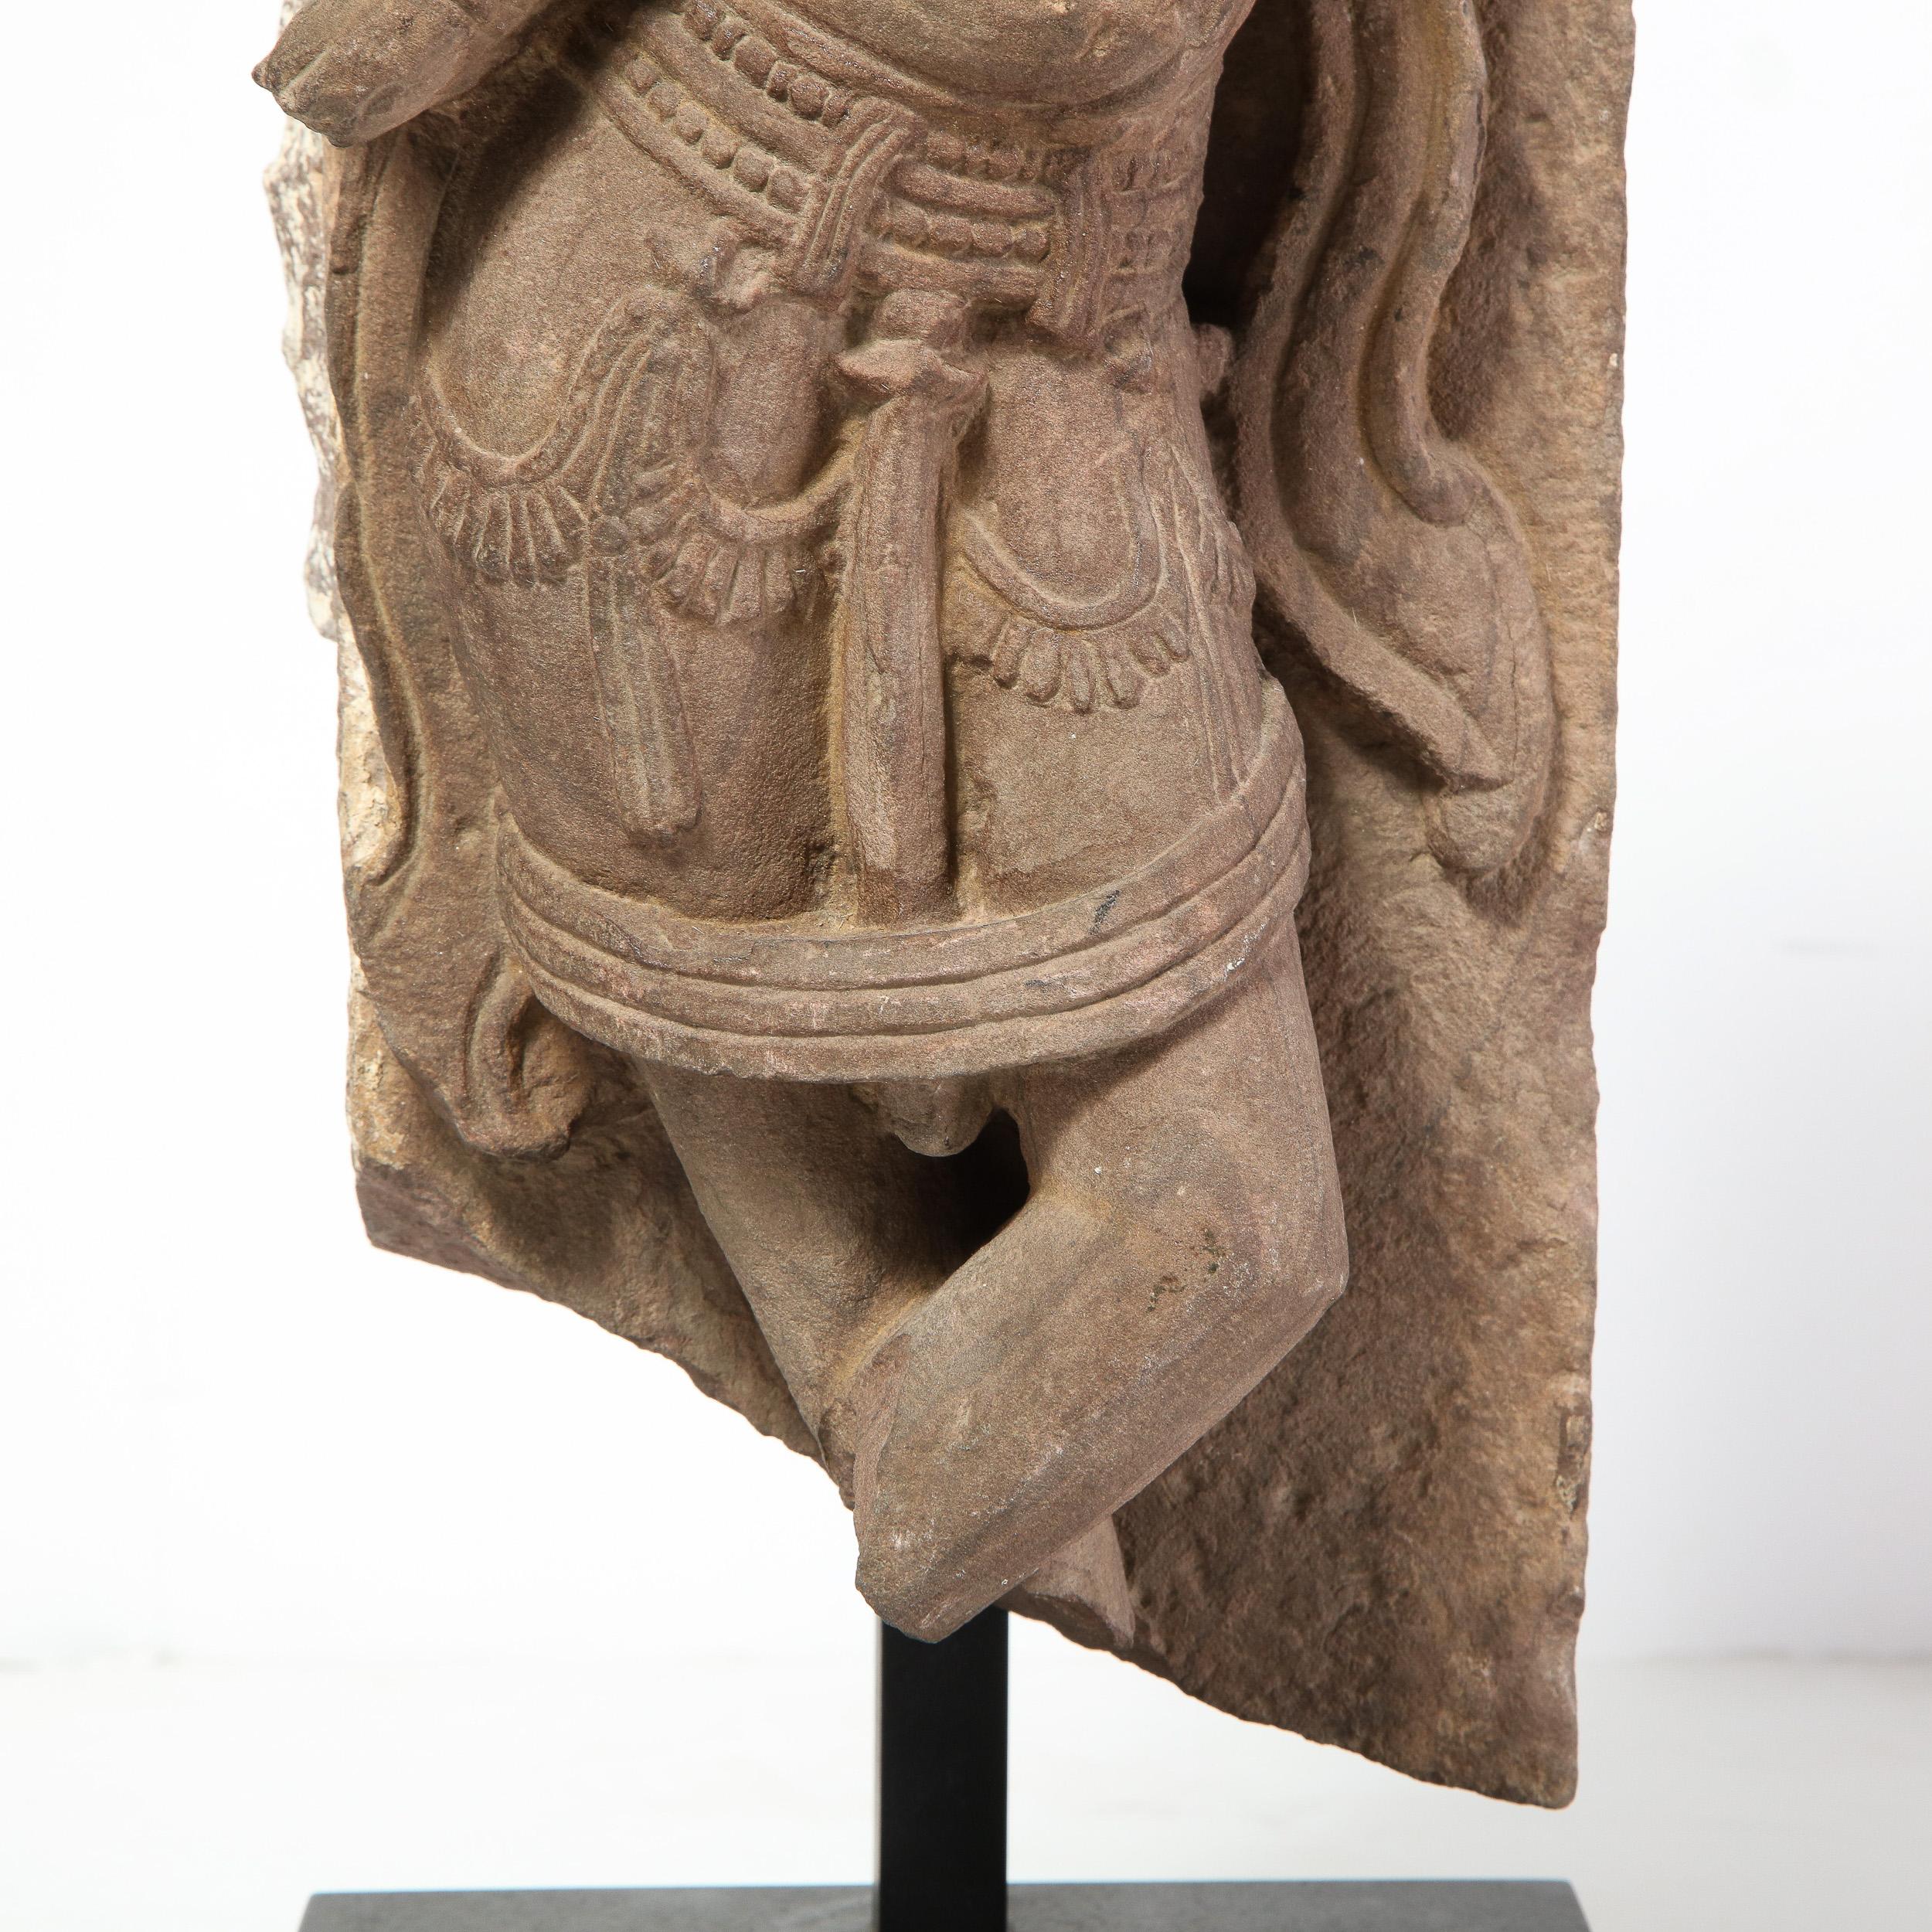 18th Century and Earlier 13th Century Indian Sandstone Stele Figure / Dancing Goddess Antiquity Fragment